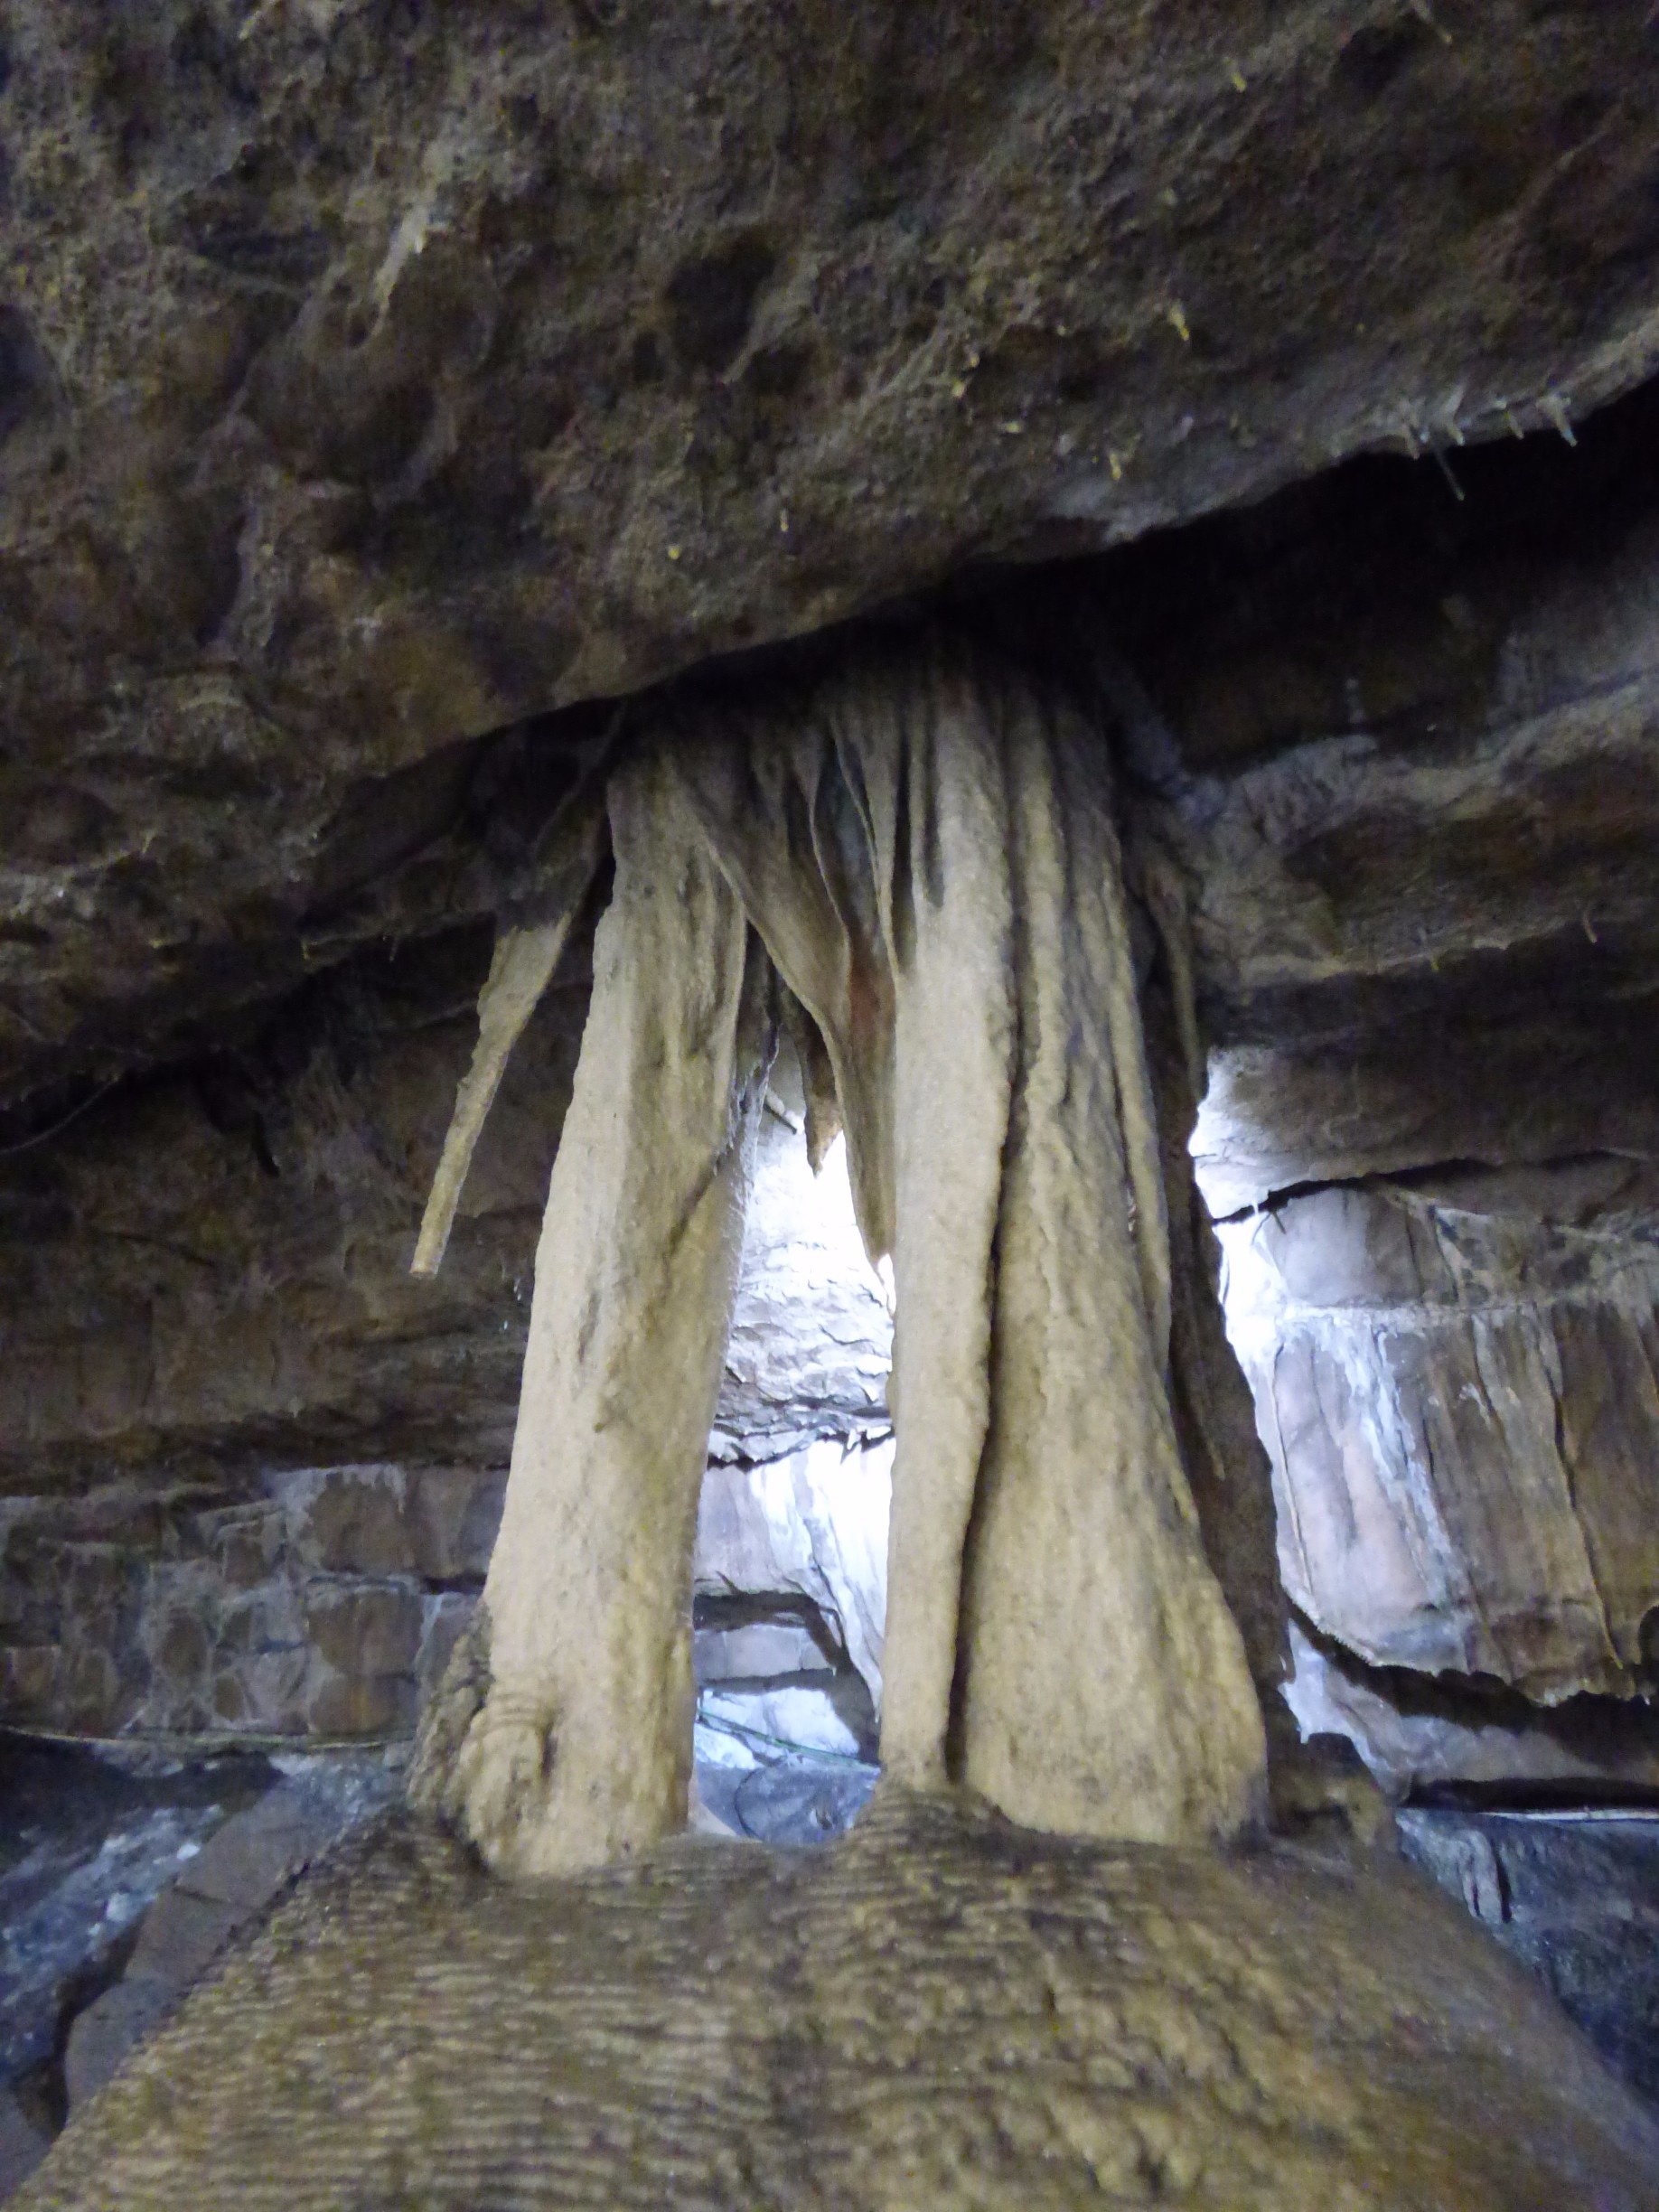 Stalactite formation inside Ingleborough Cave , just outside of Clapham in Yorkshire.  This is fondly known as 'The Elephant'. Can you see the resemblance? :) There's an interesting guided tour you can do through the cave and lots  more formations to see. . You can even take the dog!